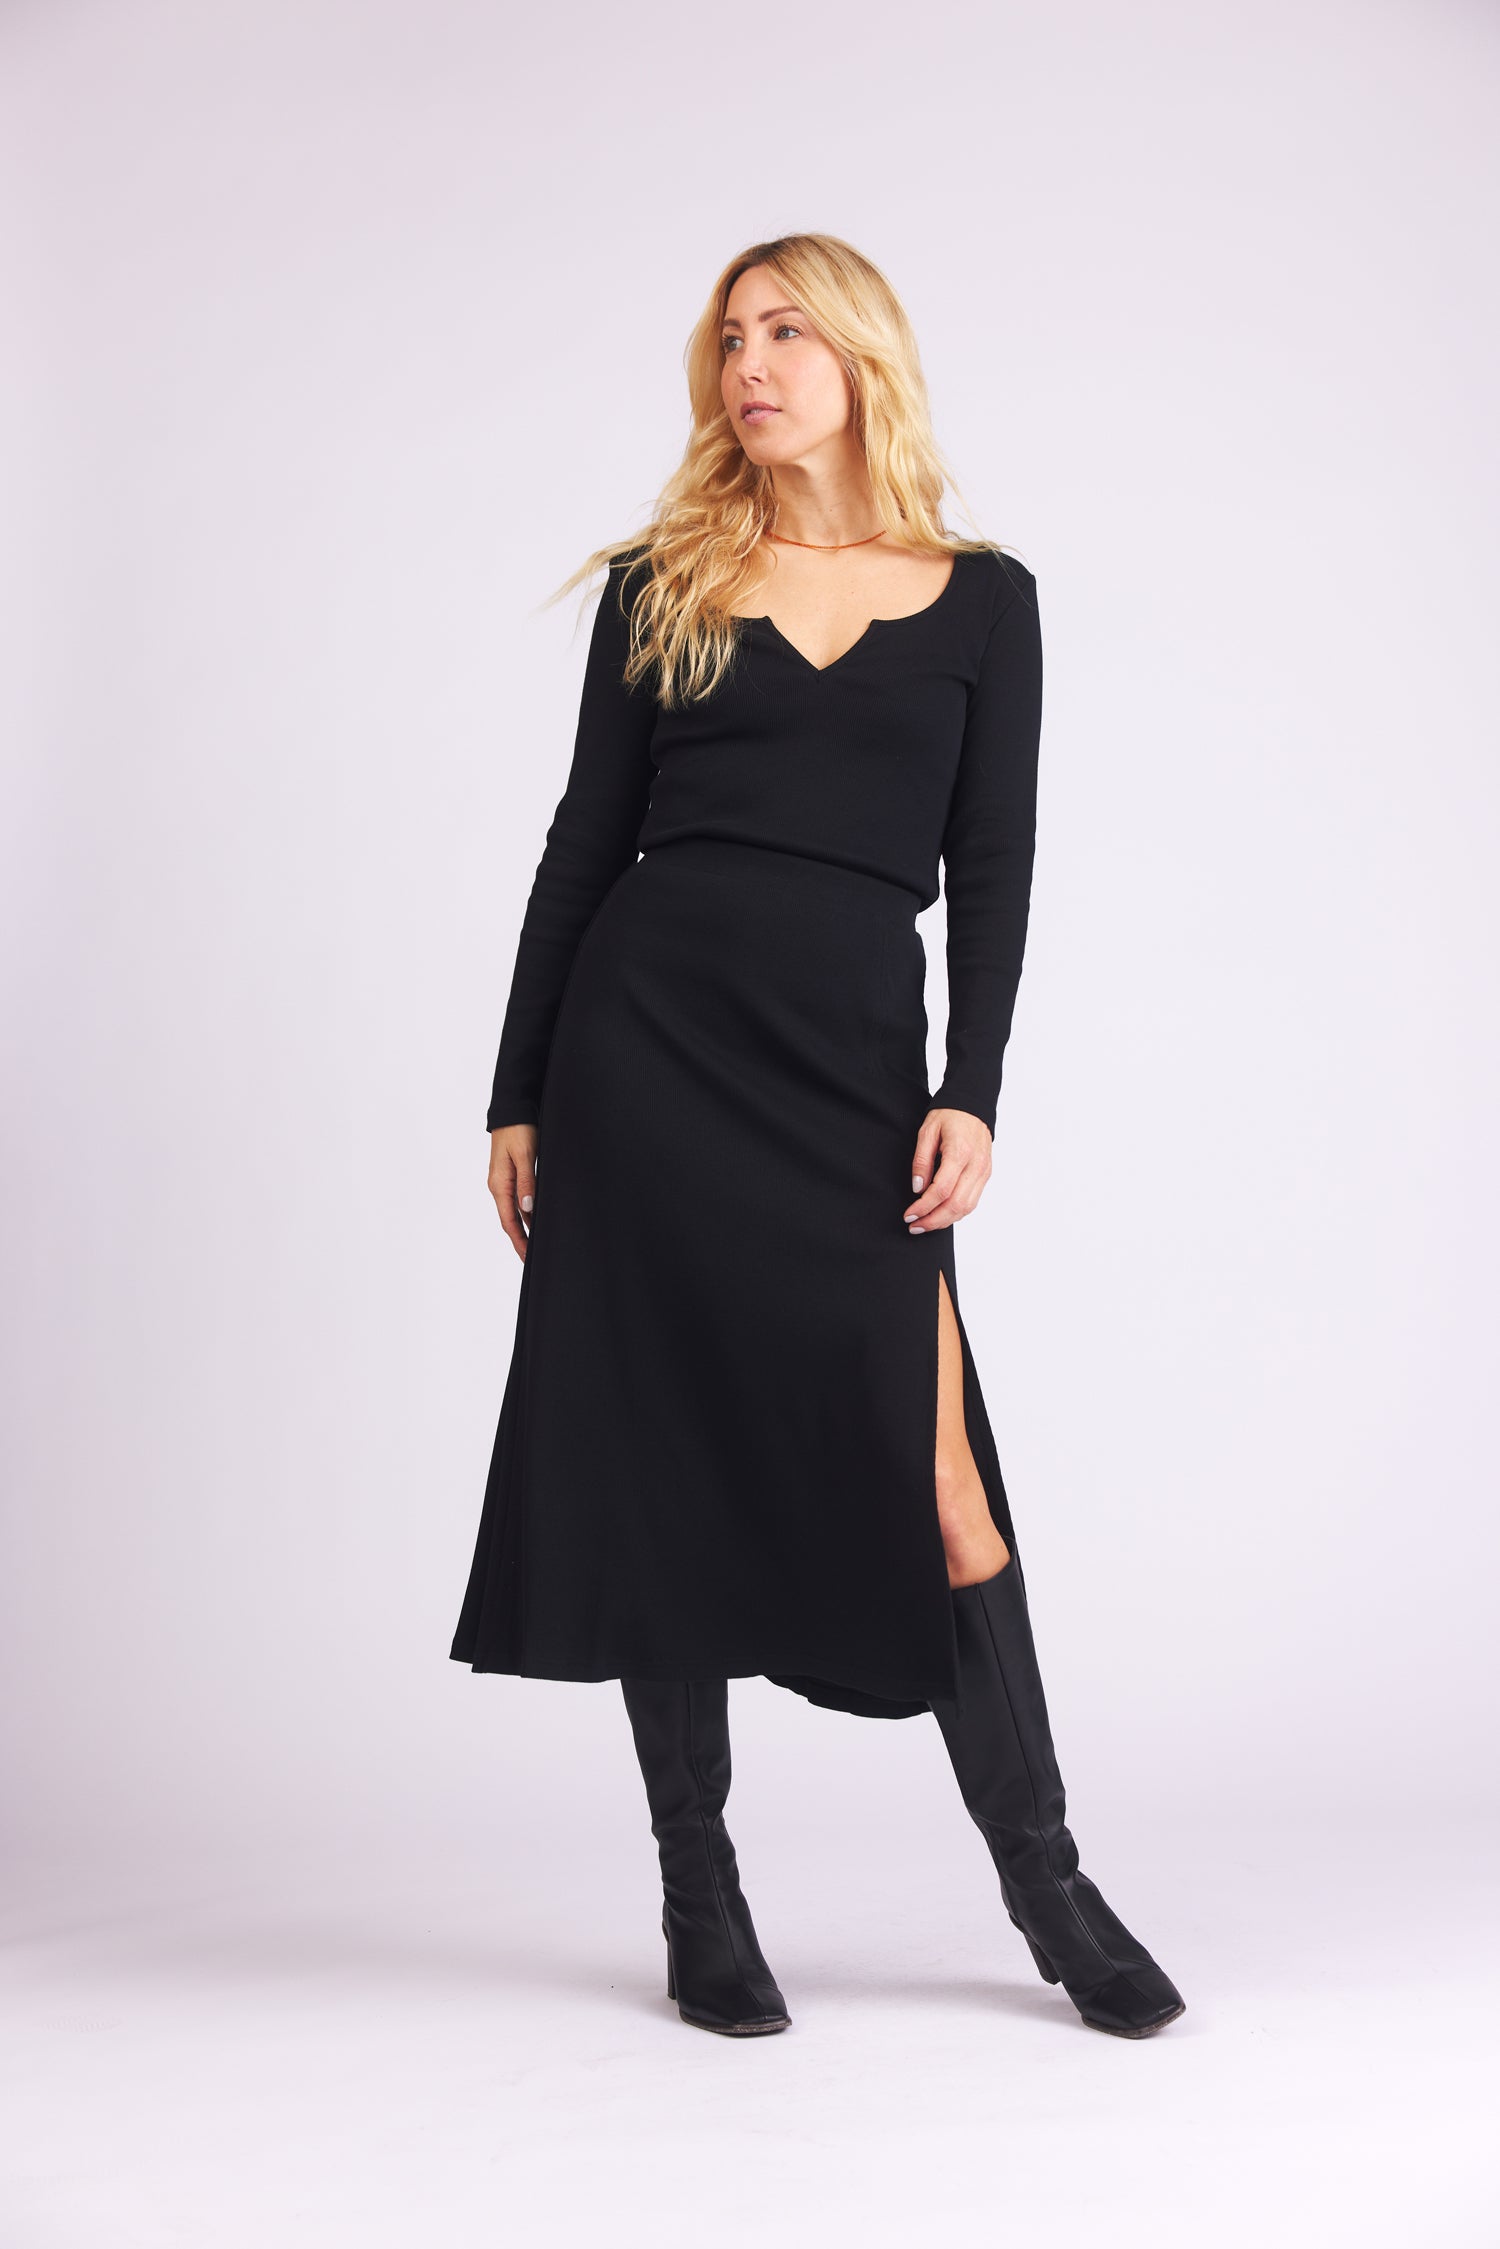 Black Blake skirt made of organic cotton from Baige the Label